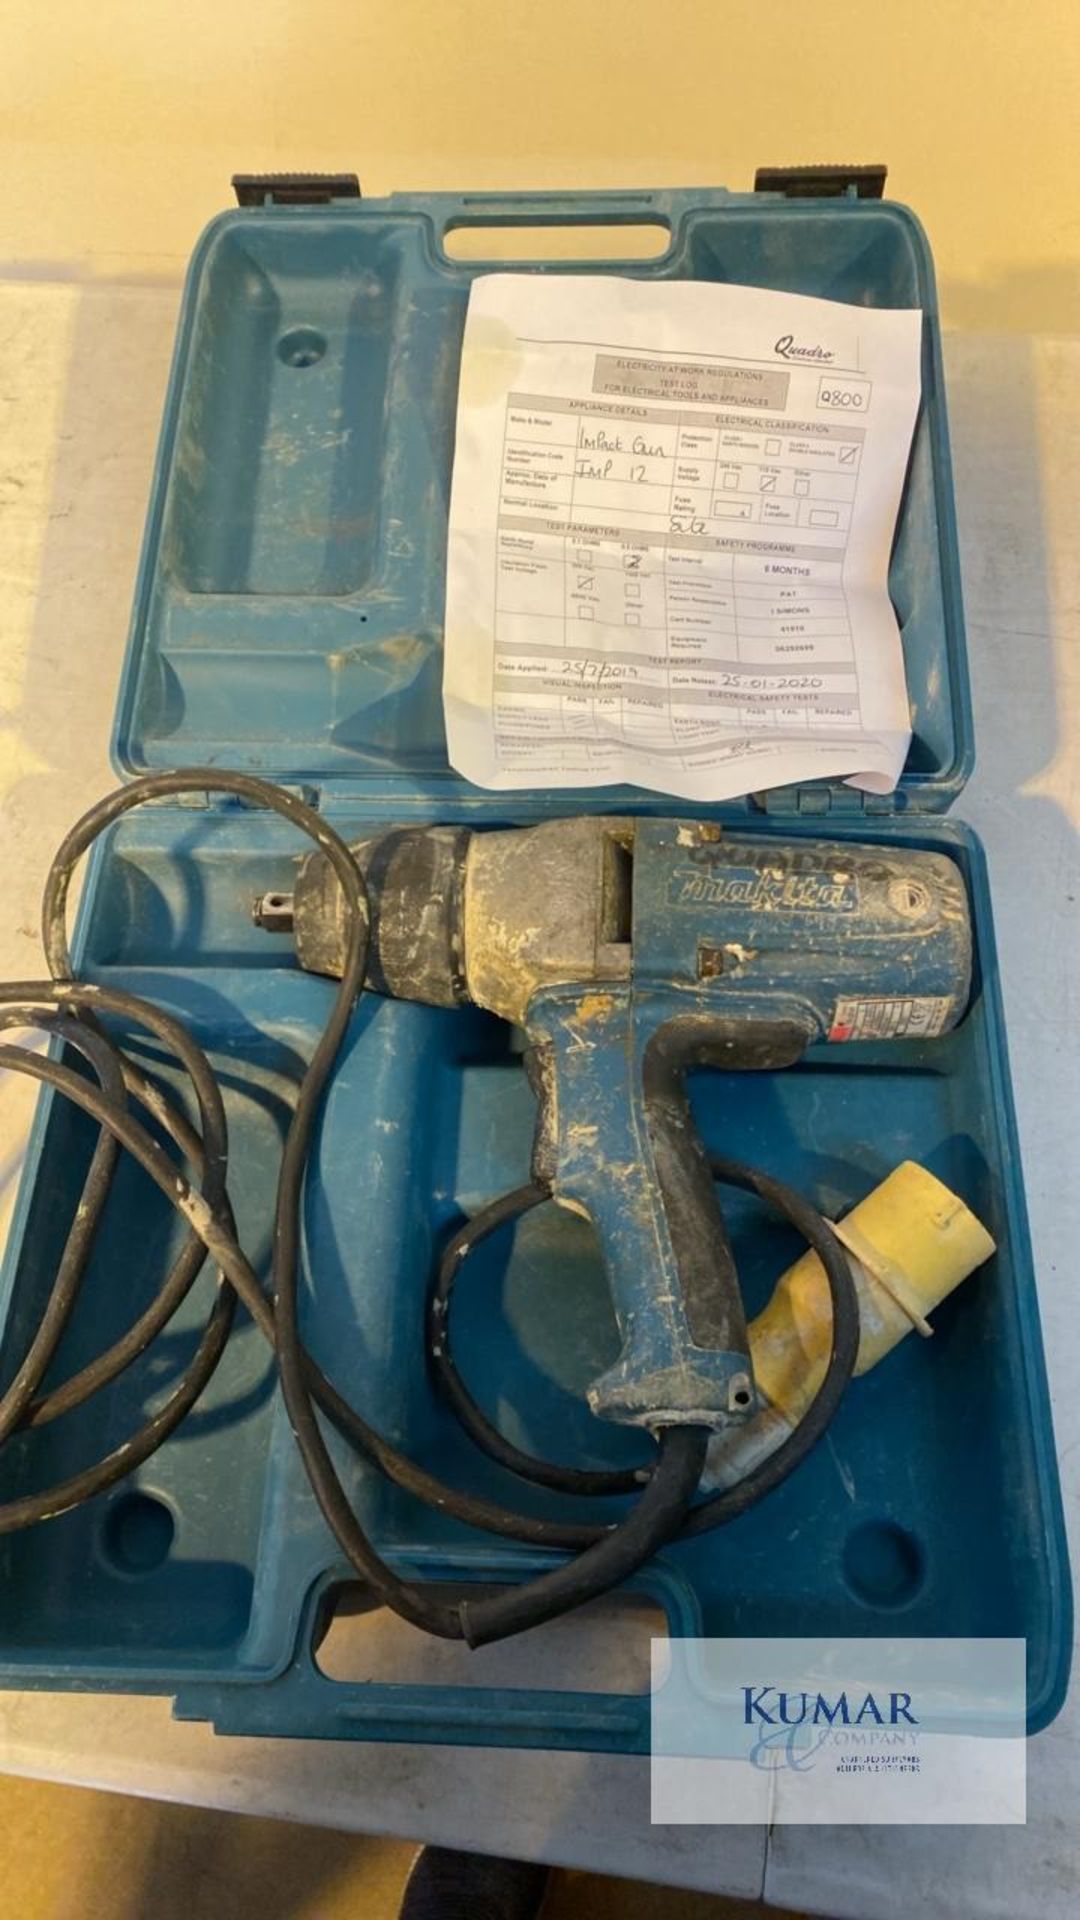 Makita TWO350 110 Volt 1/2" Impact Wrench, 400 Watt, Serial No.84075 (2007) with Carry Case - Image 2 of 4